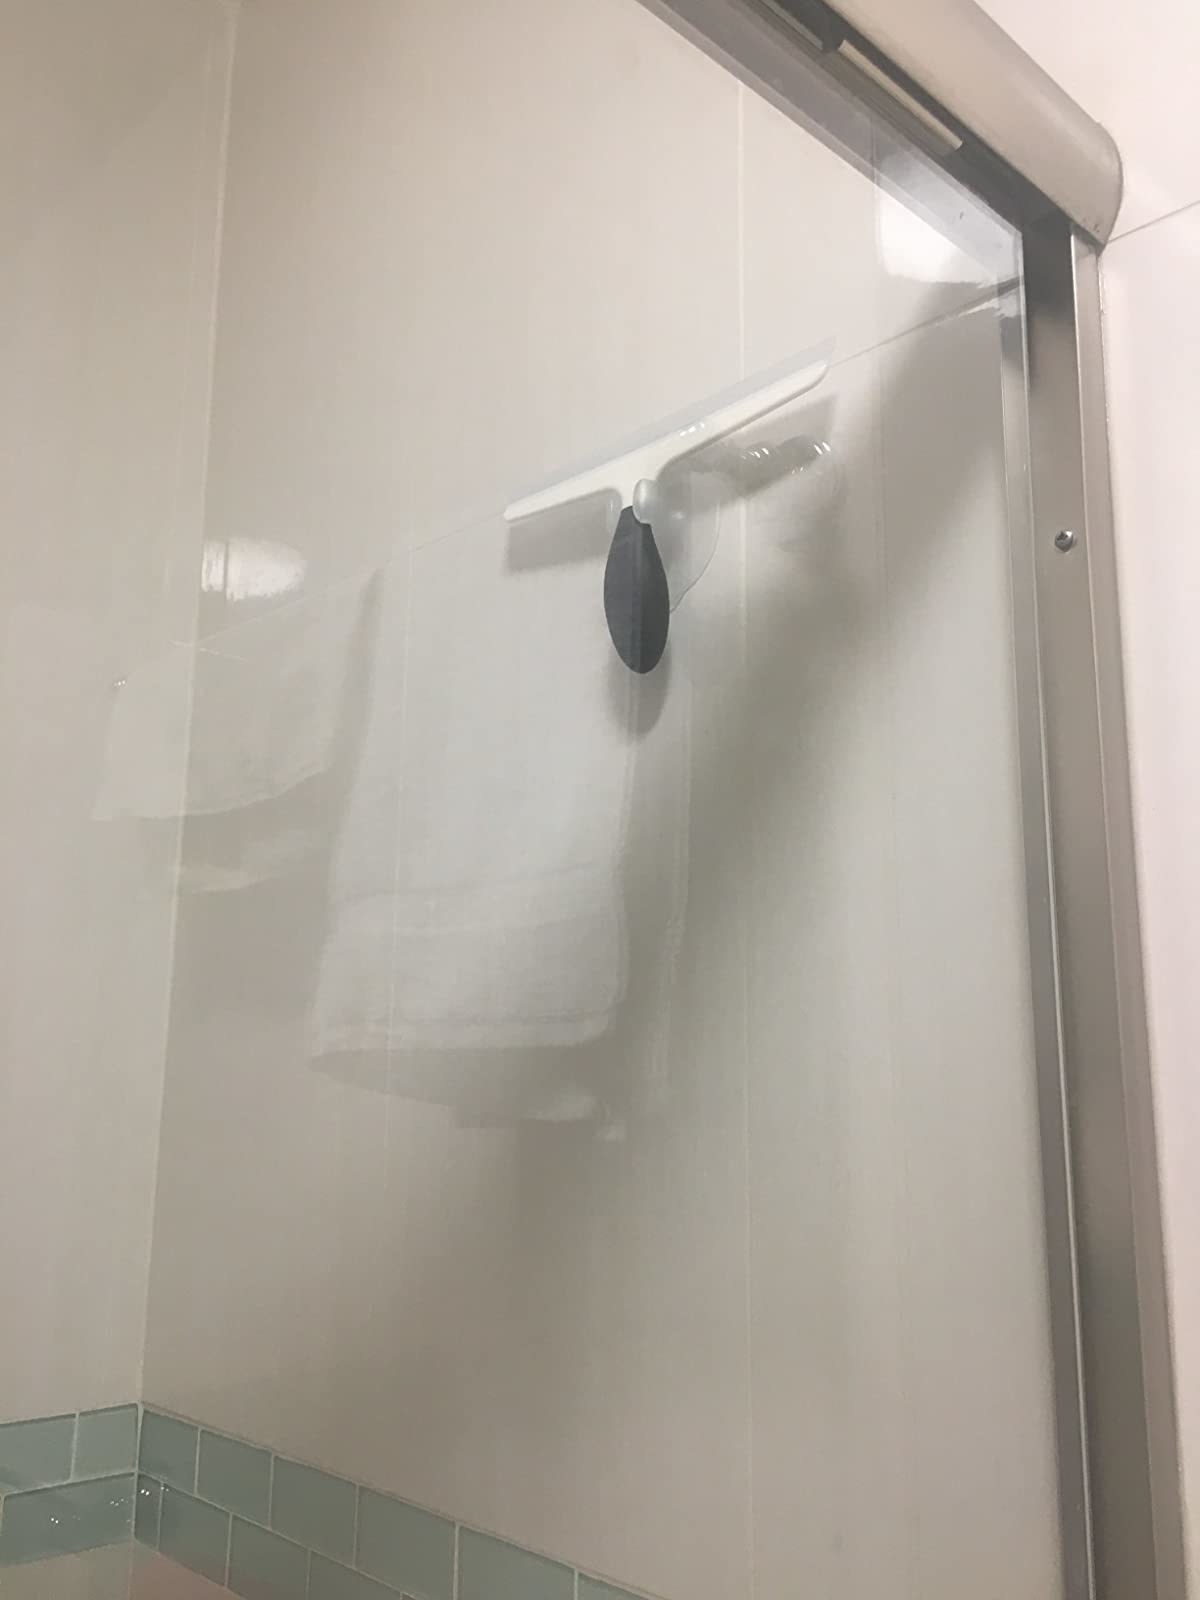 the squeegee hanging on a shower wall